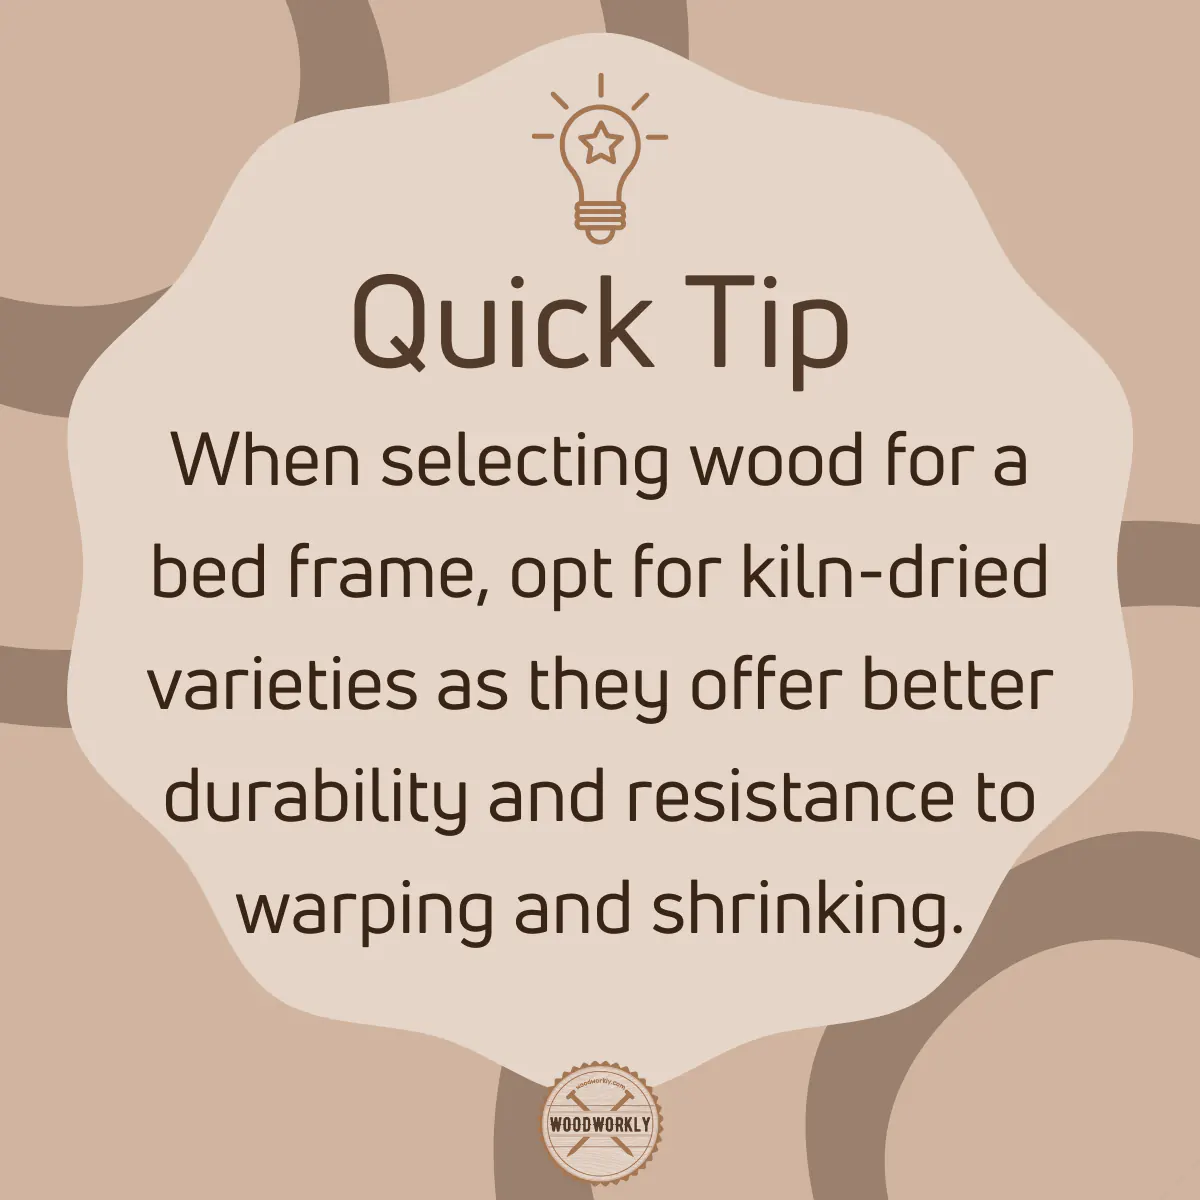 Tip for selecting wood for bed frame